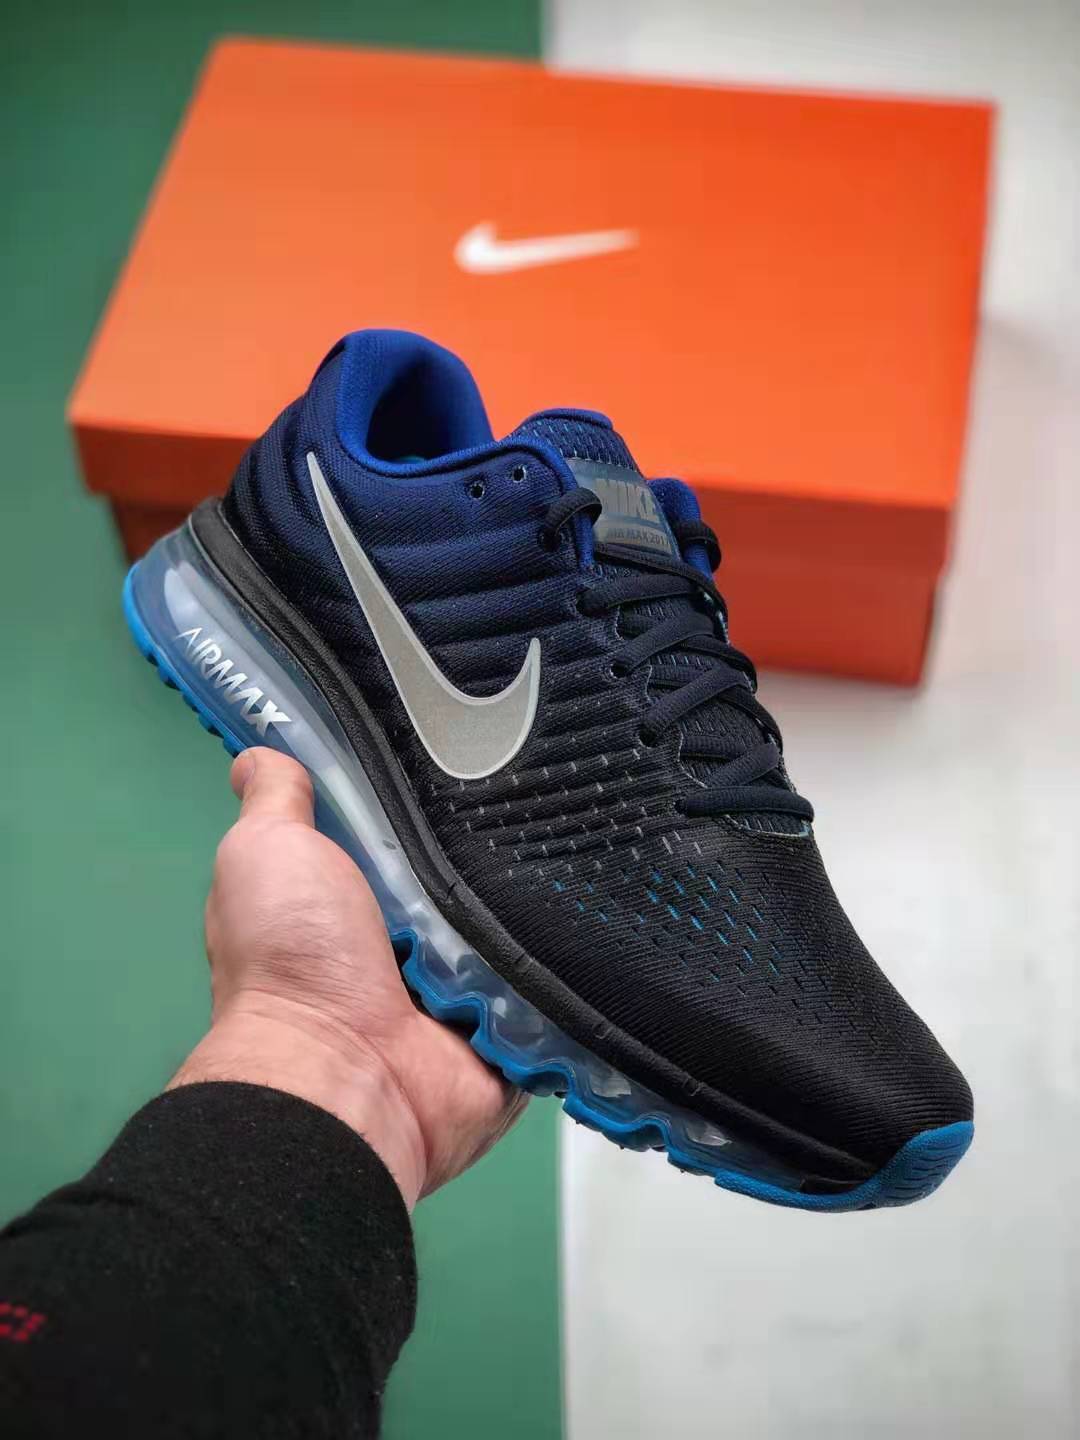 Nike Air Max 2017 'Dark Obsidian' 849559-400 - Limited Edition Sneakers at Great Prices